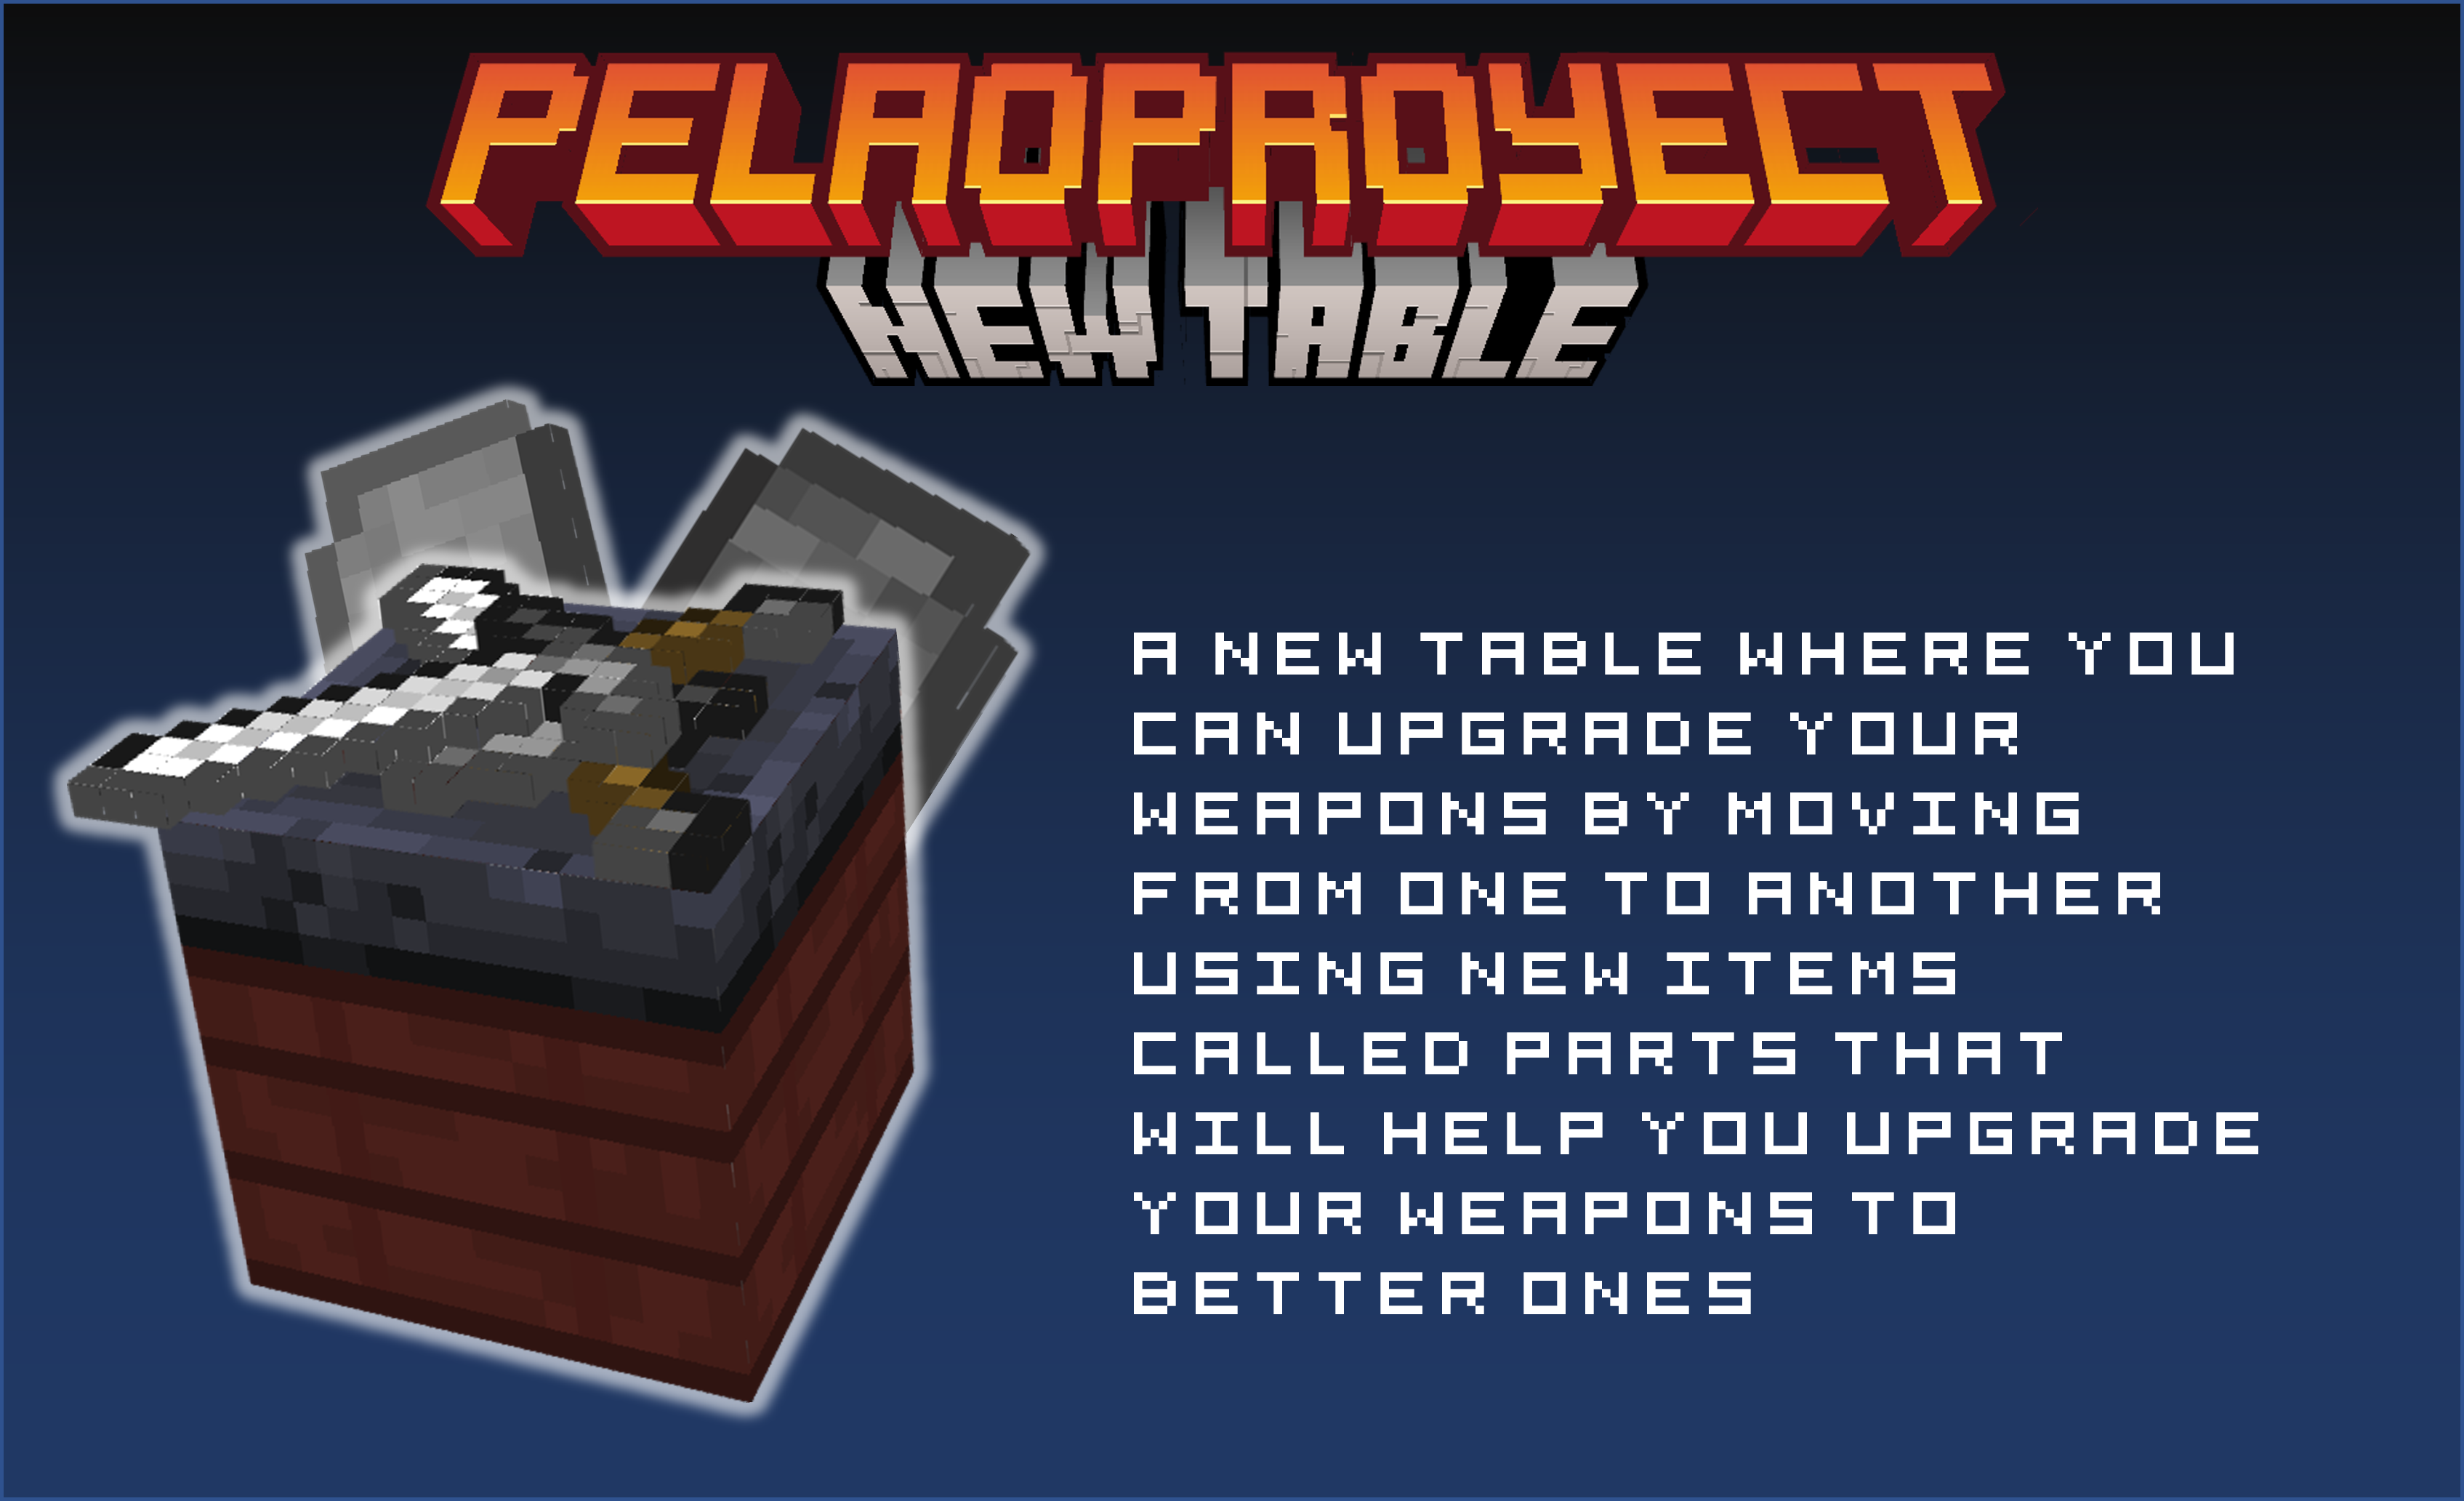 PelaoProyect || Wood and Tables - 1.2.0 🪓 Minecraft Mod